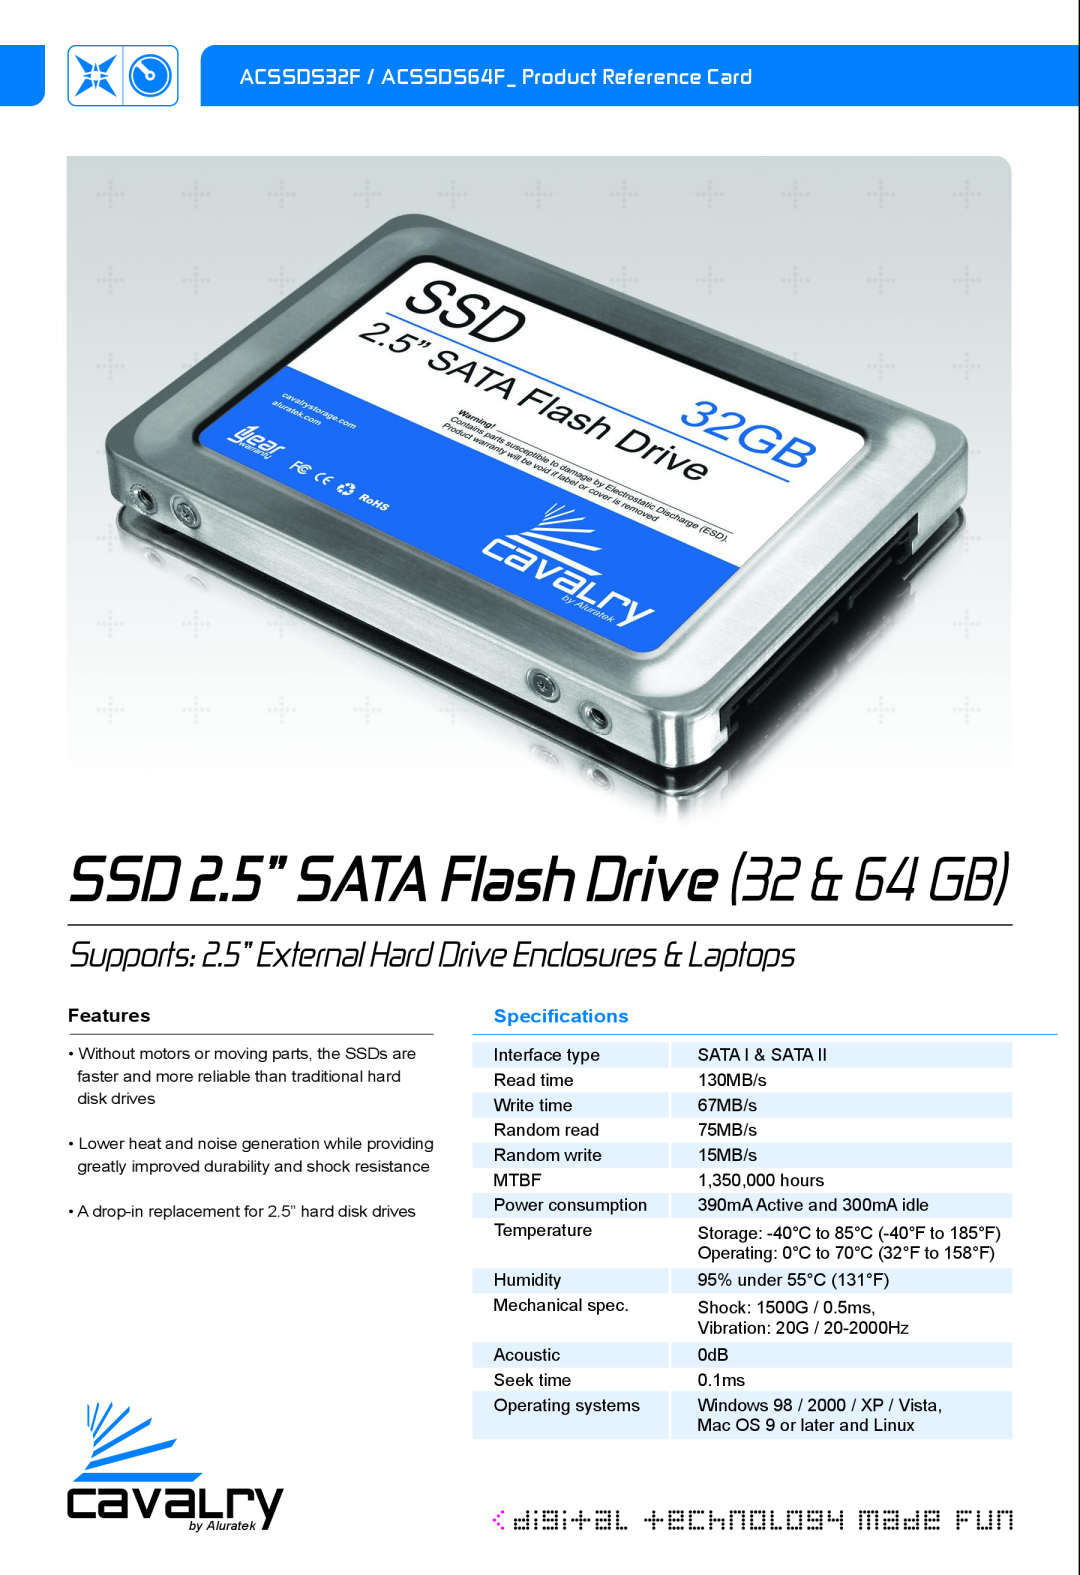 Aluratek ACSSDS32F specifications Supports 2.5” External Hard Drive Enclosures & Laptops, Features, Speciﬁcations 